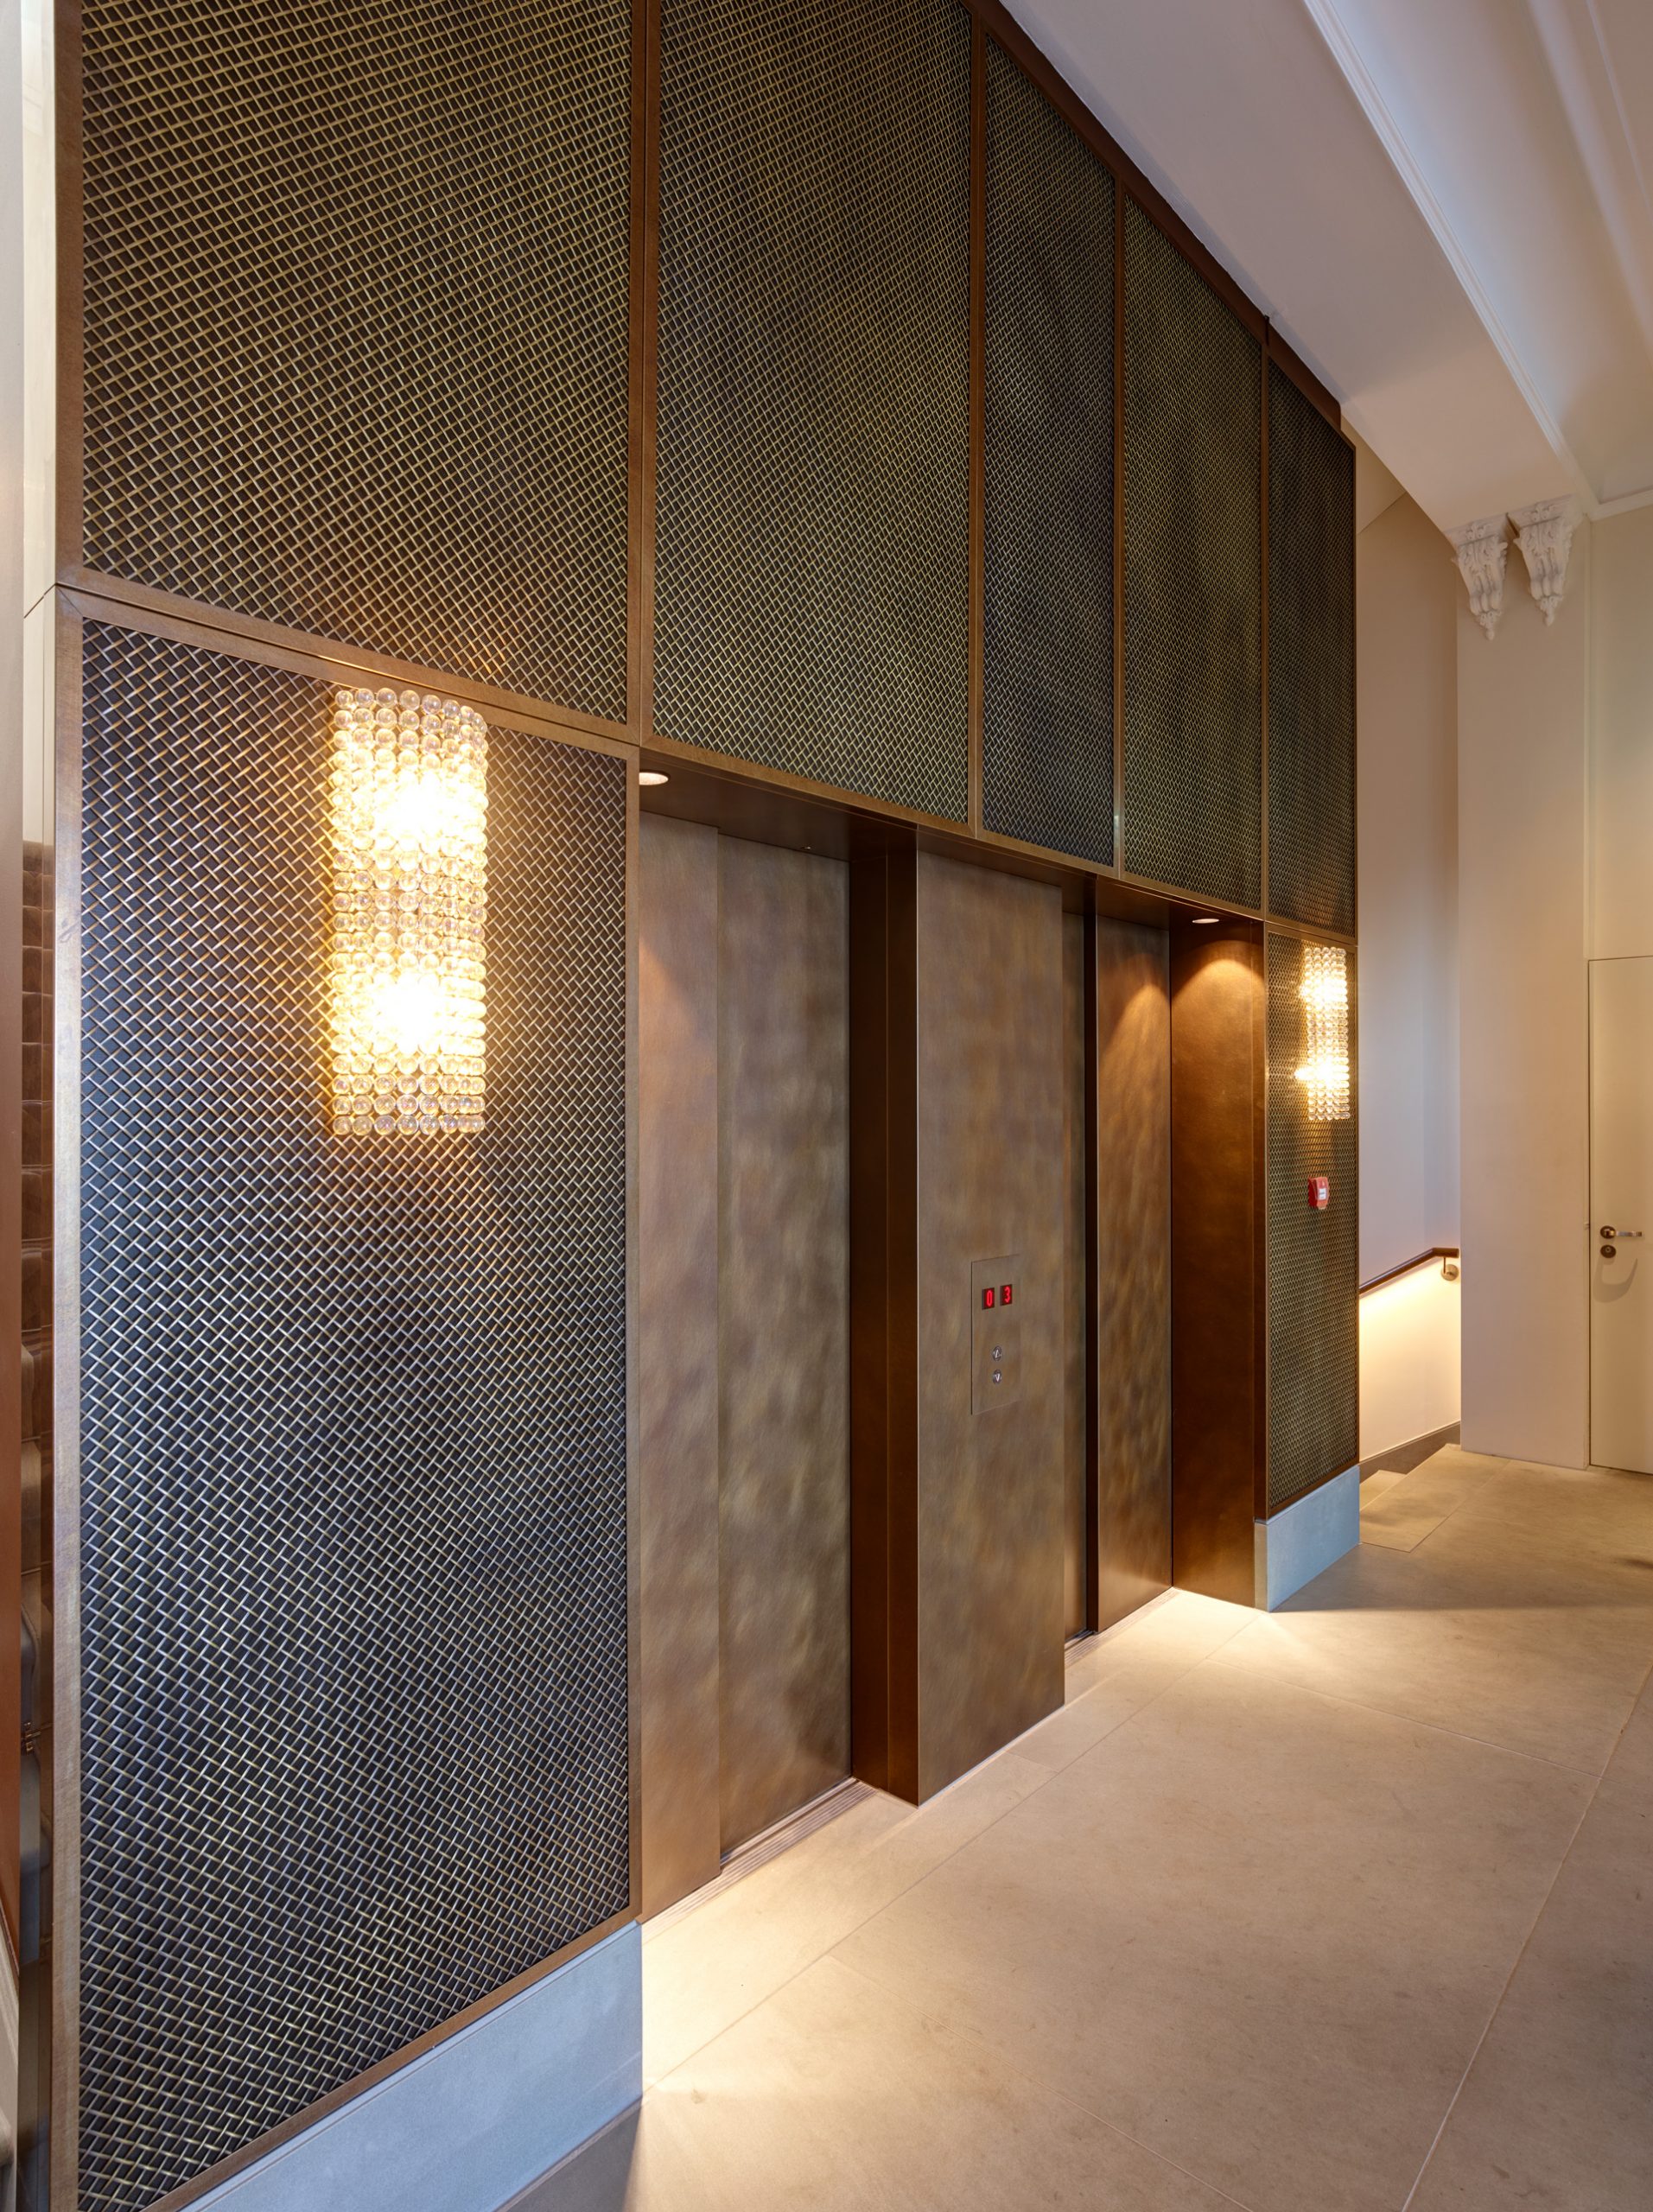 Elevators in a hall inside the Hotel Bürgenstock. Elevator doors are made from Nordic Décor copper and they have semi-matte surface. The walls of the elevator are also made from Nordic Décor. Top part of the elevator and walls on far right and far left have a copper mesh element on top of it. Walls on the far right and far left have decorated lamps mounted on their top parts.